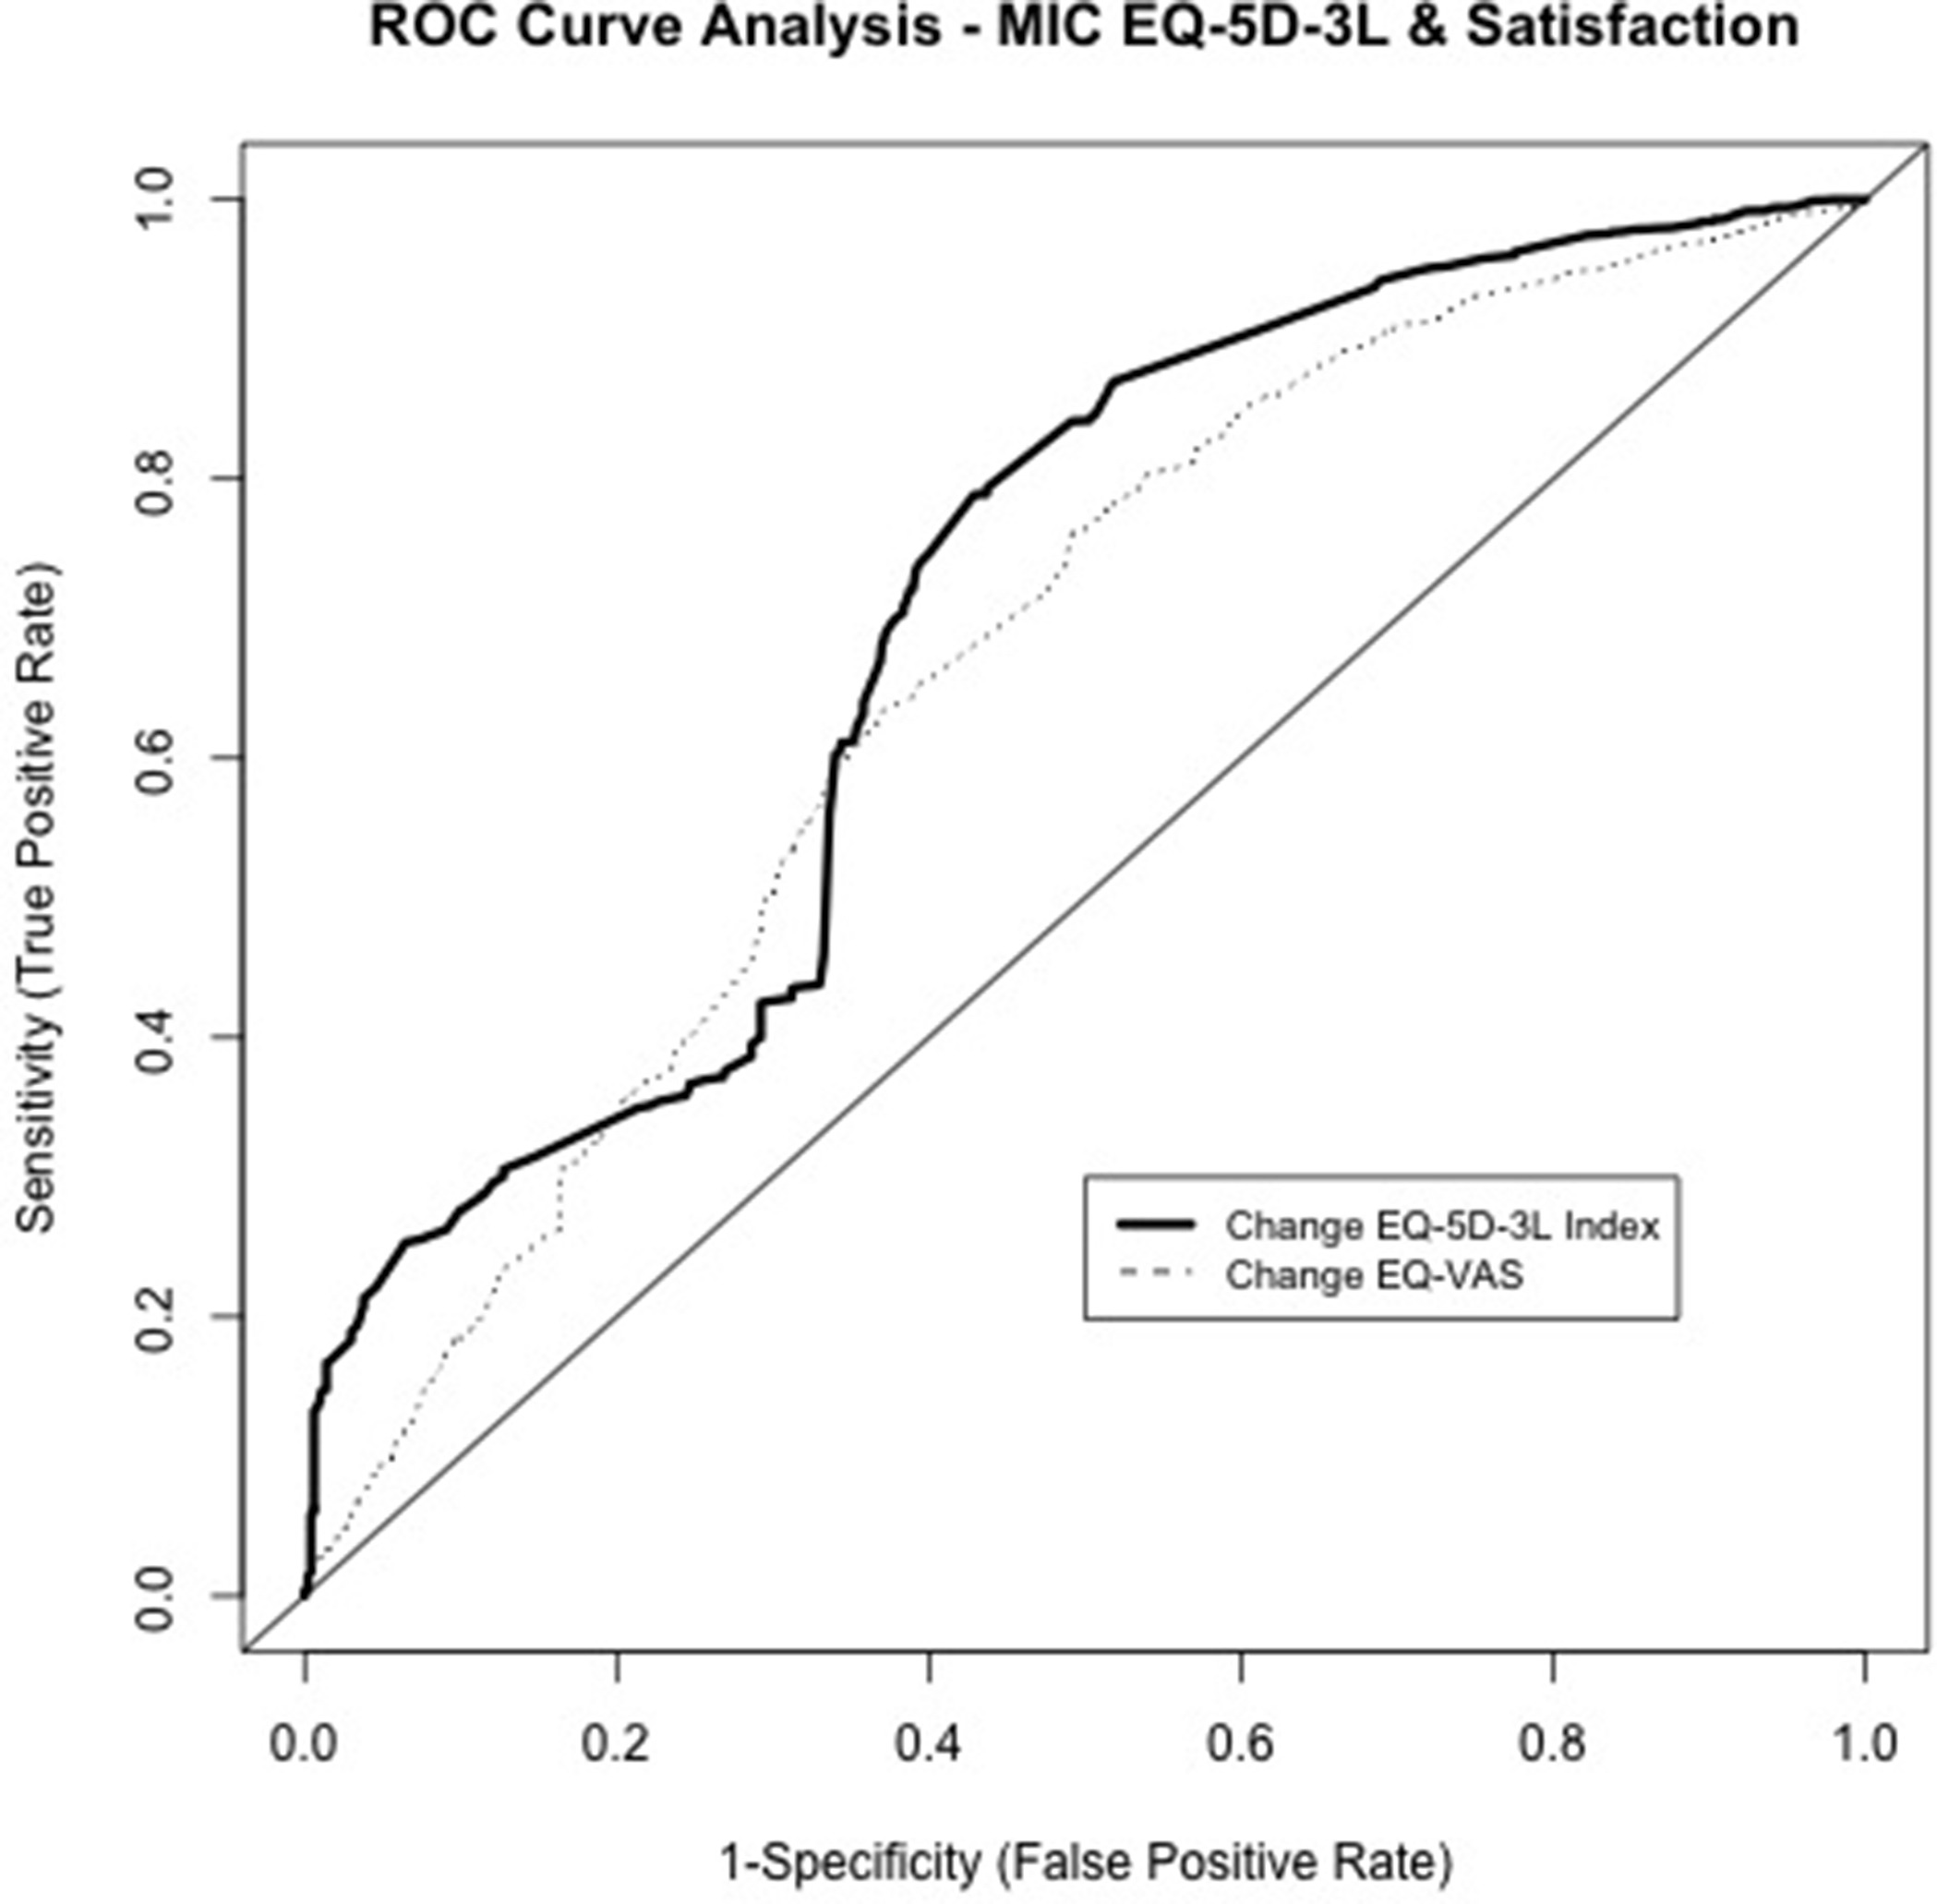 Fig. 3 
            Receiver operating characteristic (ROC) curve analysis for minimal important change (MIC) (Individual) predictive of satisfaction: EuroQol five-dimension three-level questionnaire (EQ-5D-3L) Index and EuroQol visual analogue scale (EQ-VAS).
          